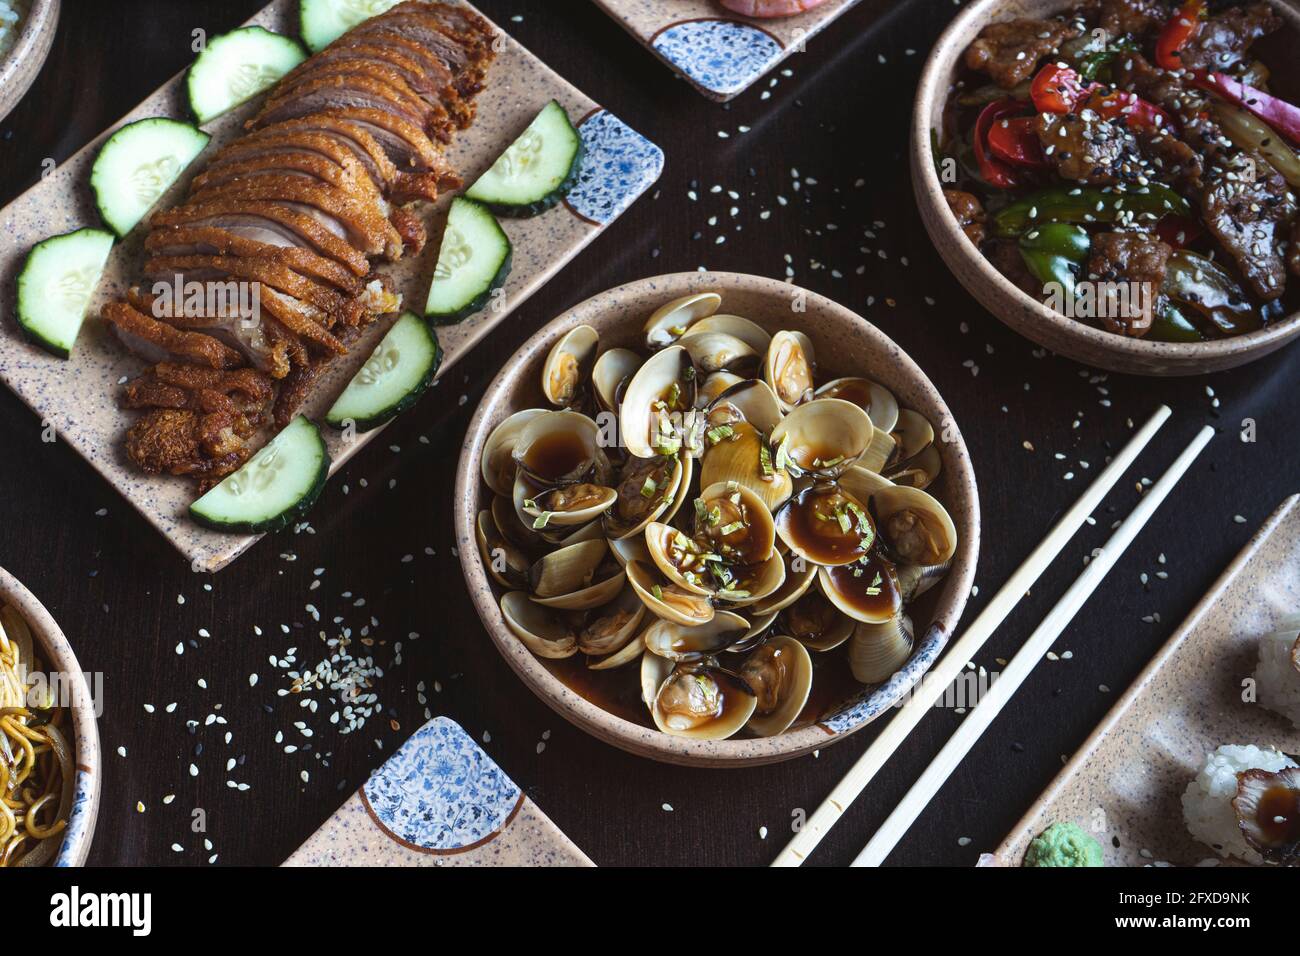 Various Japanese style dishes on the restaurant table Stock Photo